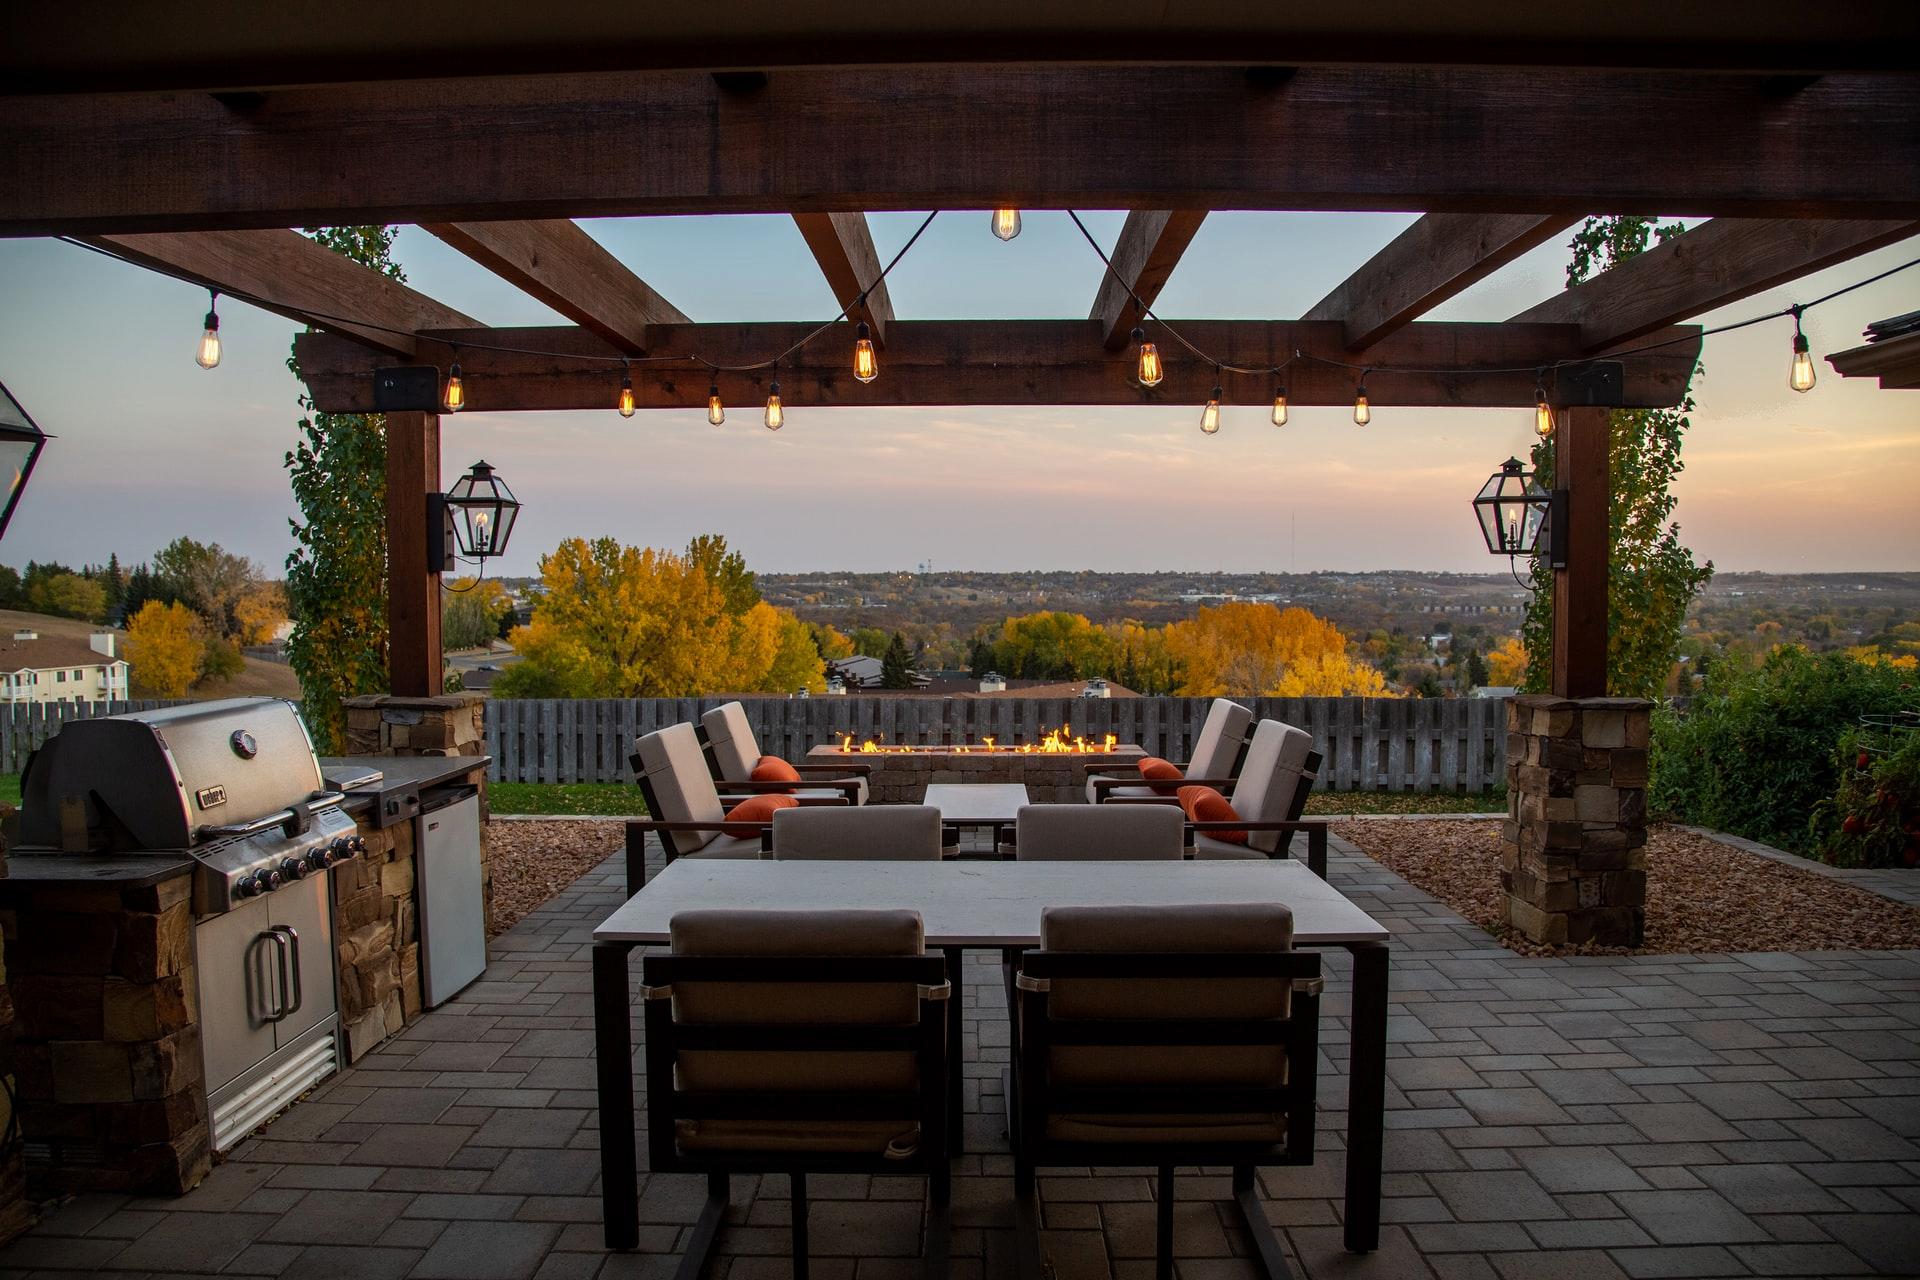 What Factors Affect Pergola Selection For Your Backyard?